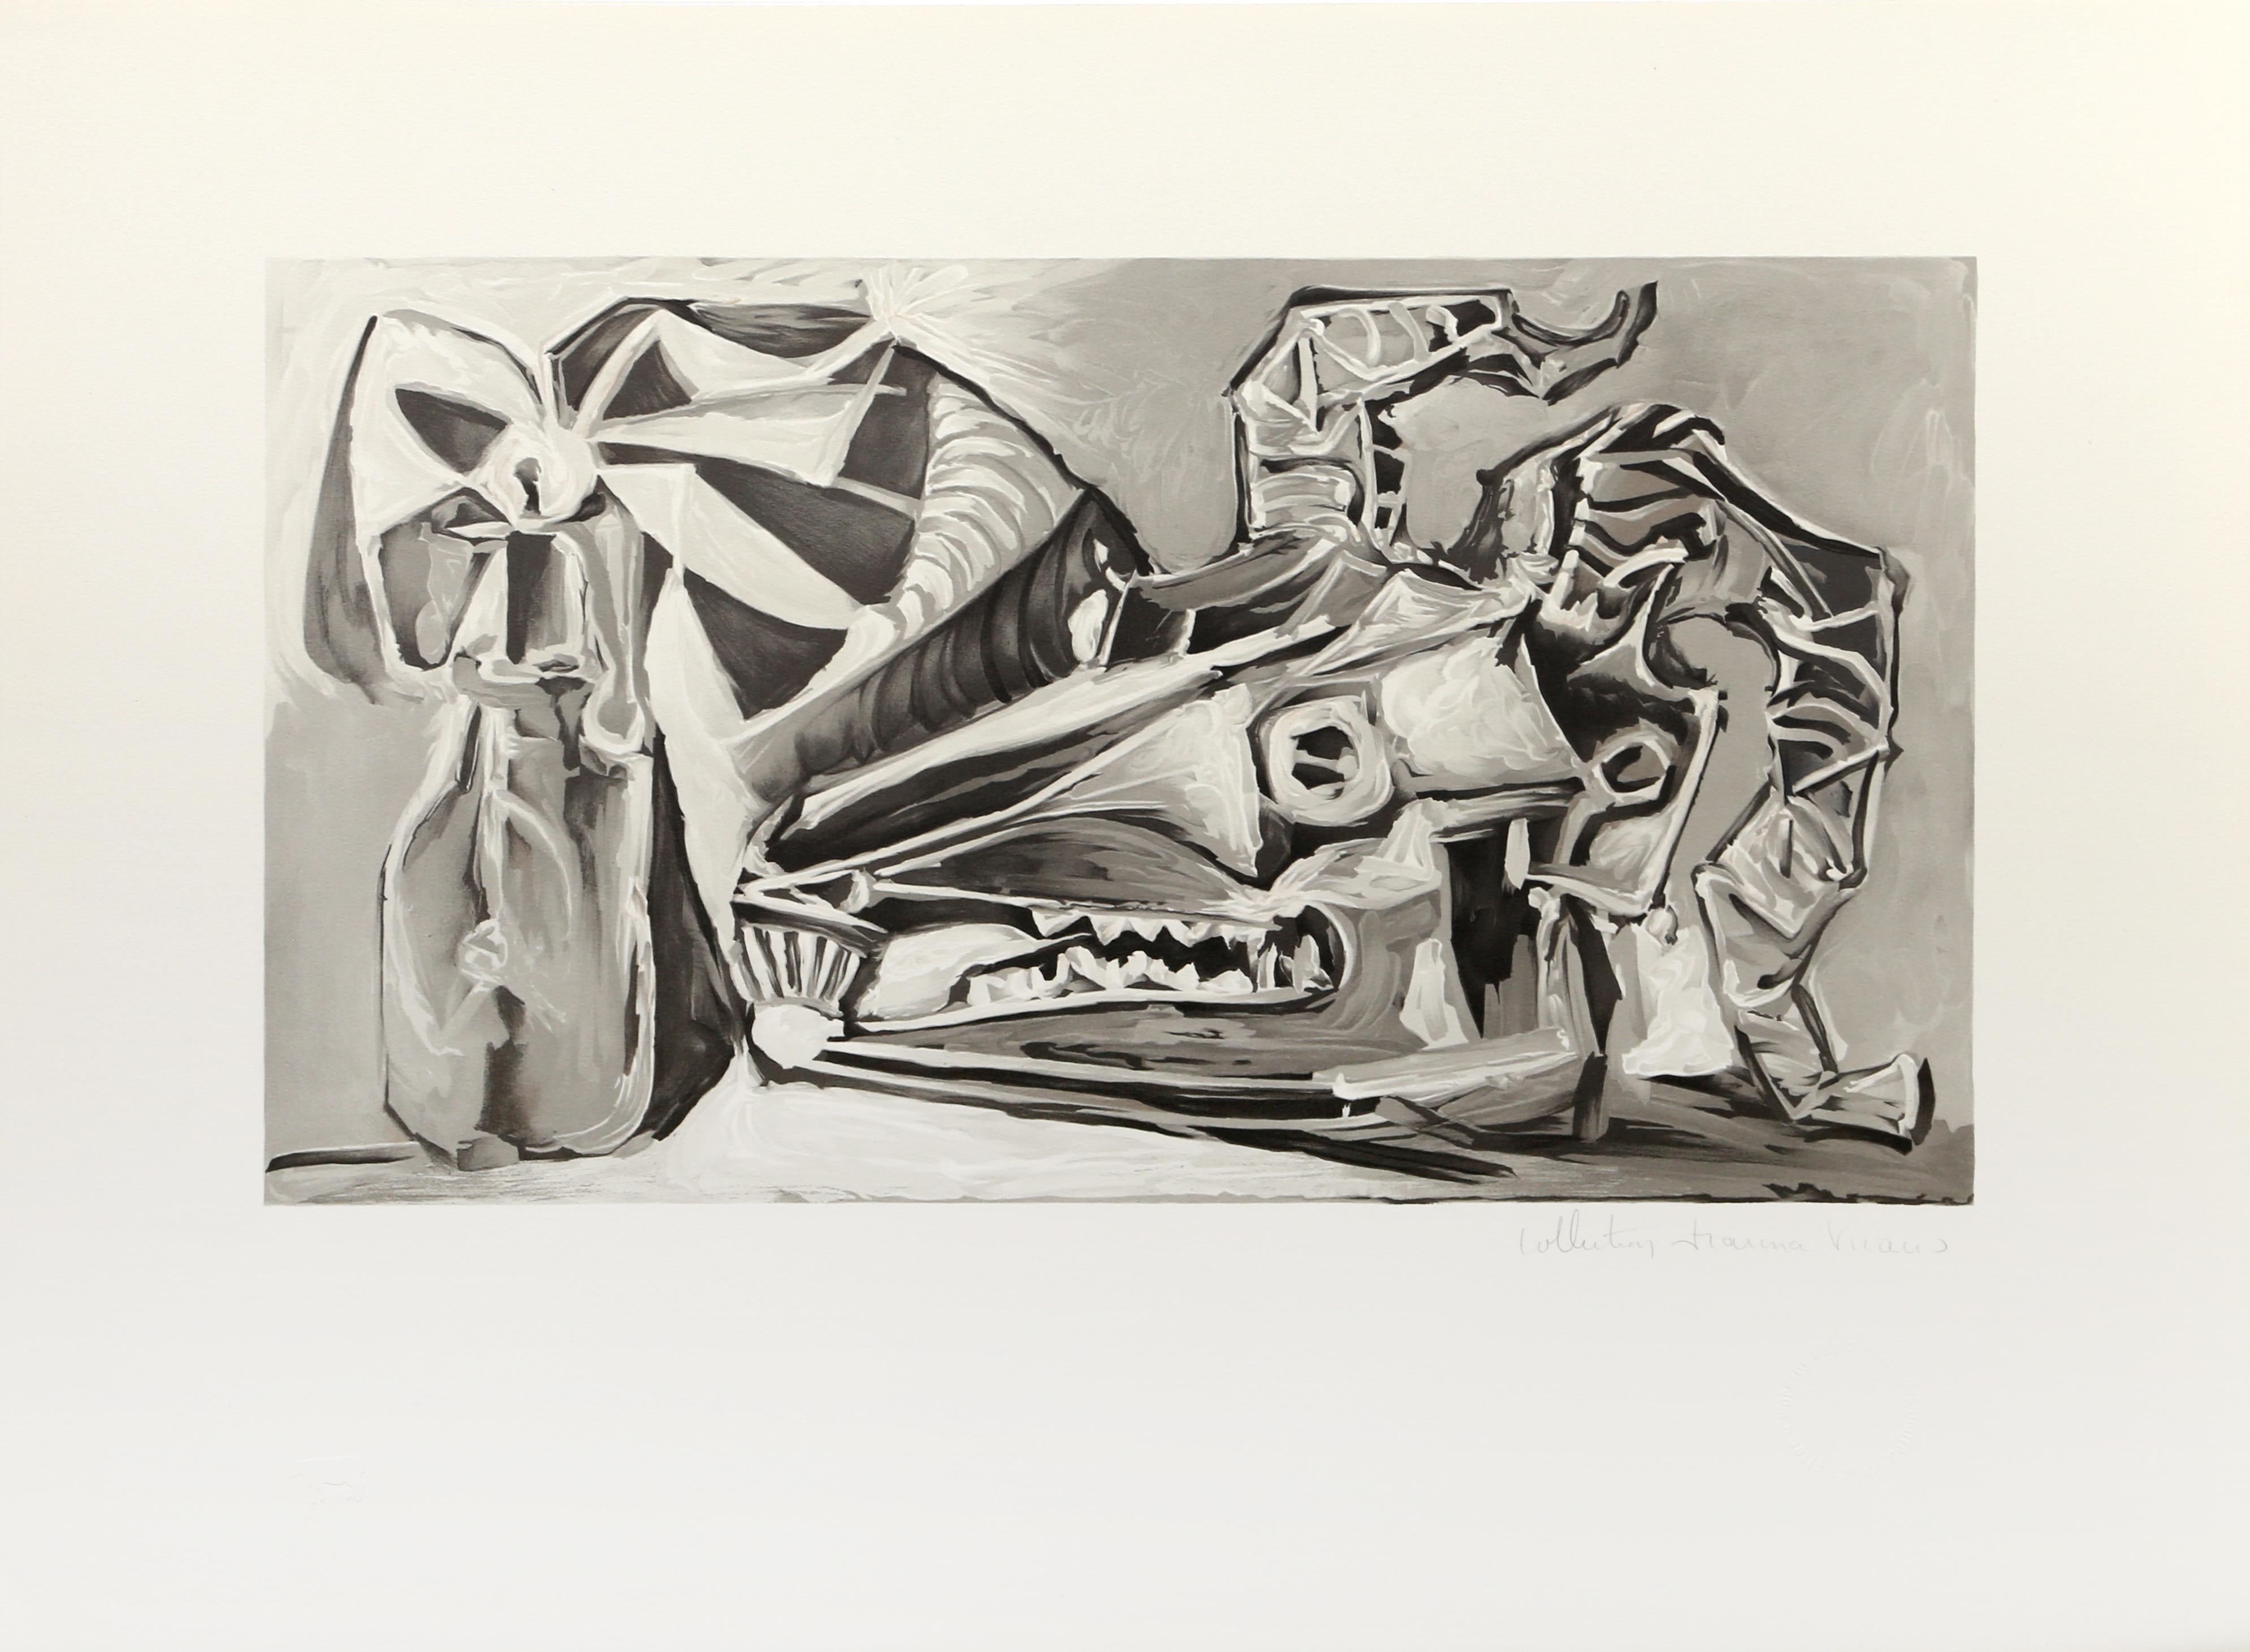 Arranged alongside one another, the goat skull accompanied by the glass bottle is rendered in a geometric fashion that is reminiscent of Pablo Picasso's other Cubist work. Devoid of color, the angular composition appears fragmented due to the